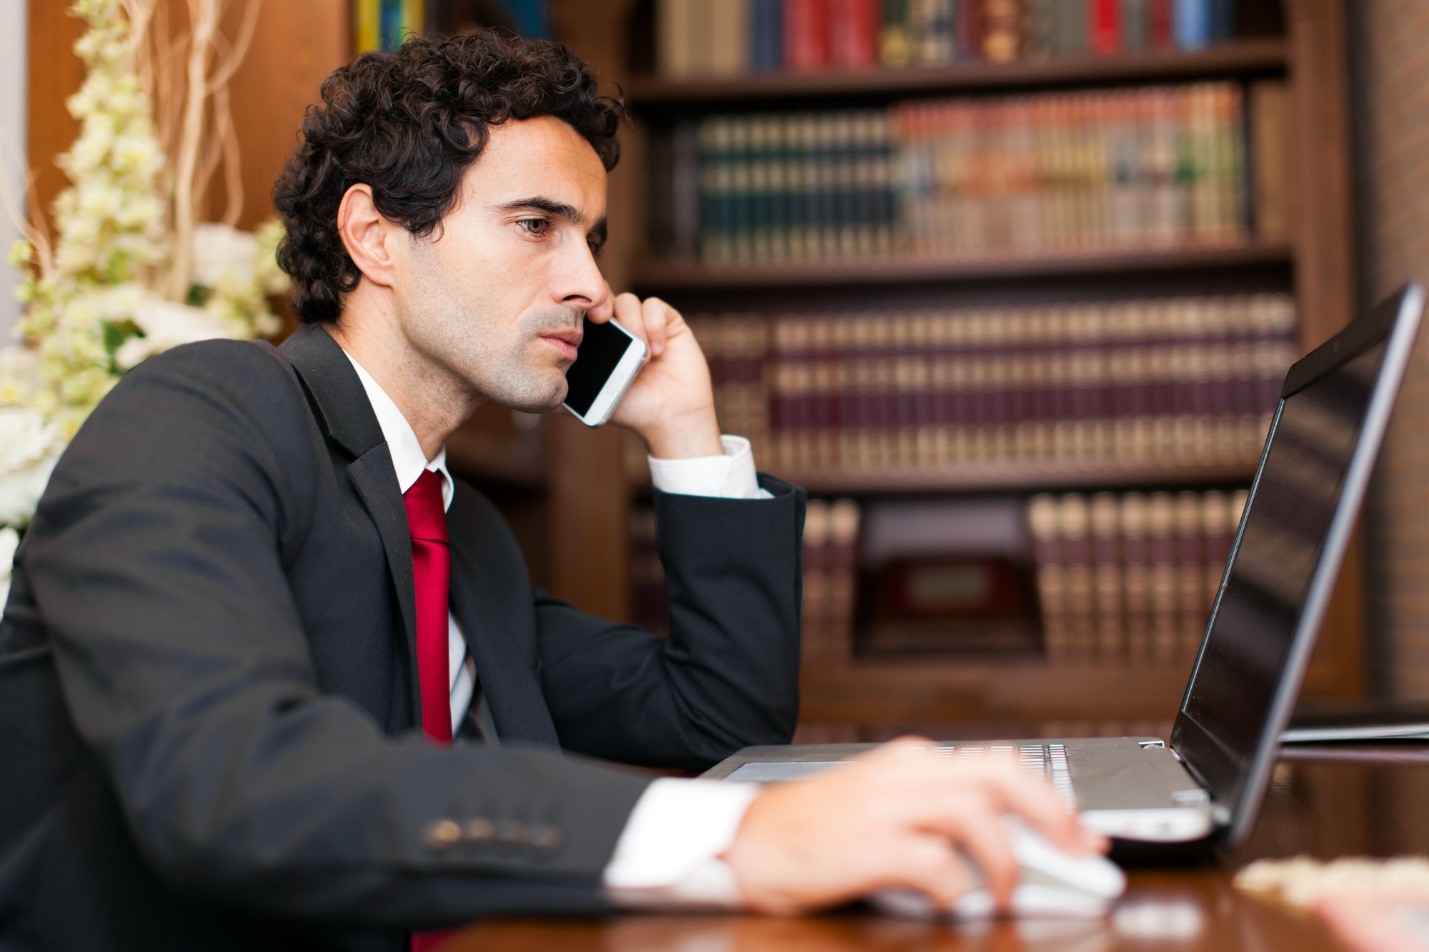 Top 5 Factors to Consider When Choosing Small Business Lawyers